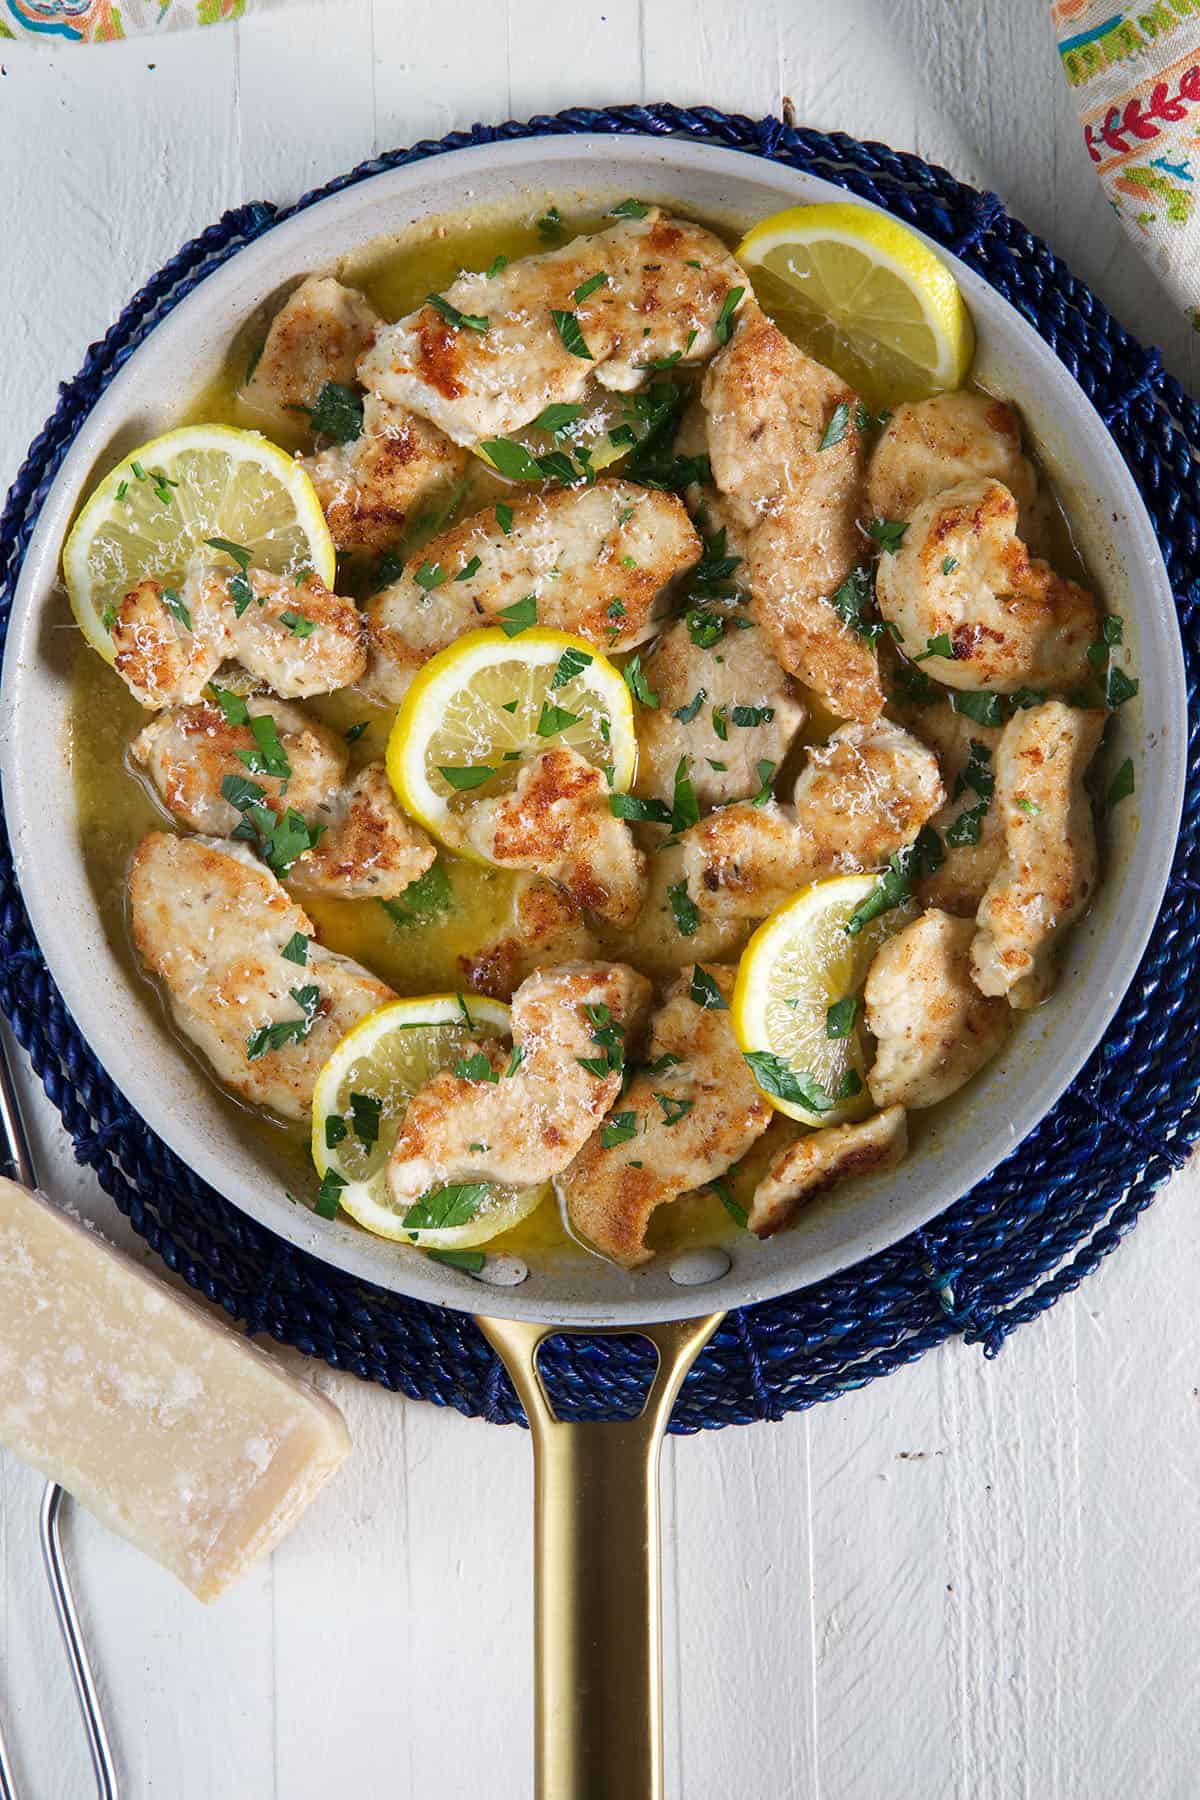 A large pan is filled with cooked chicken and lemon slices.